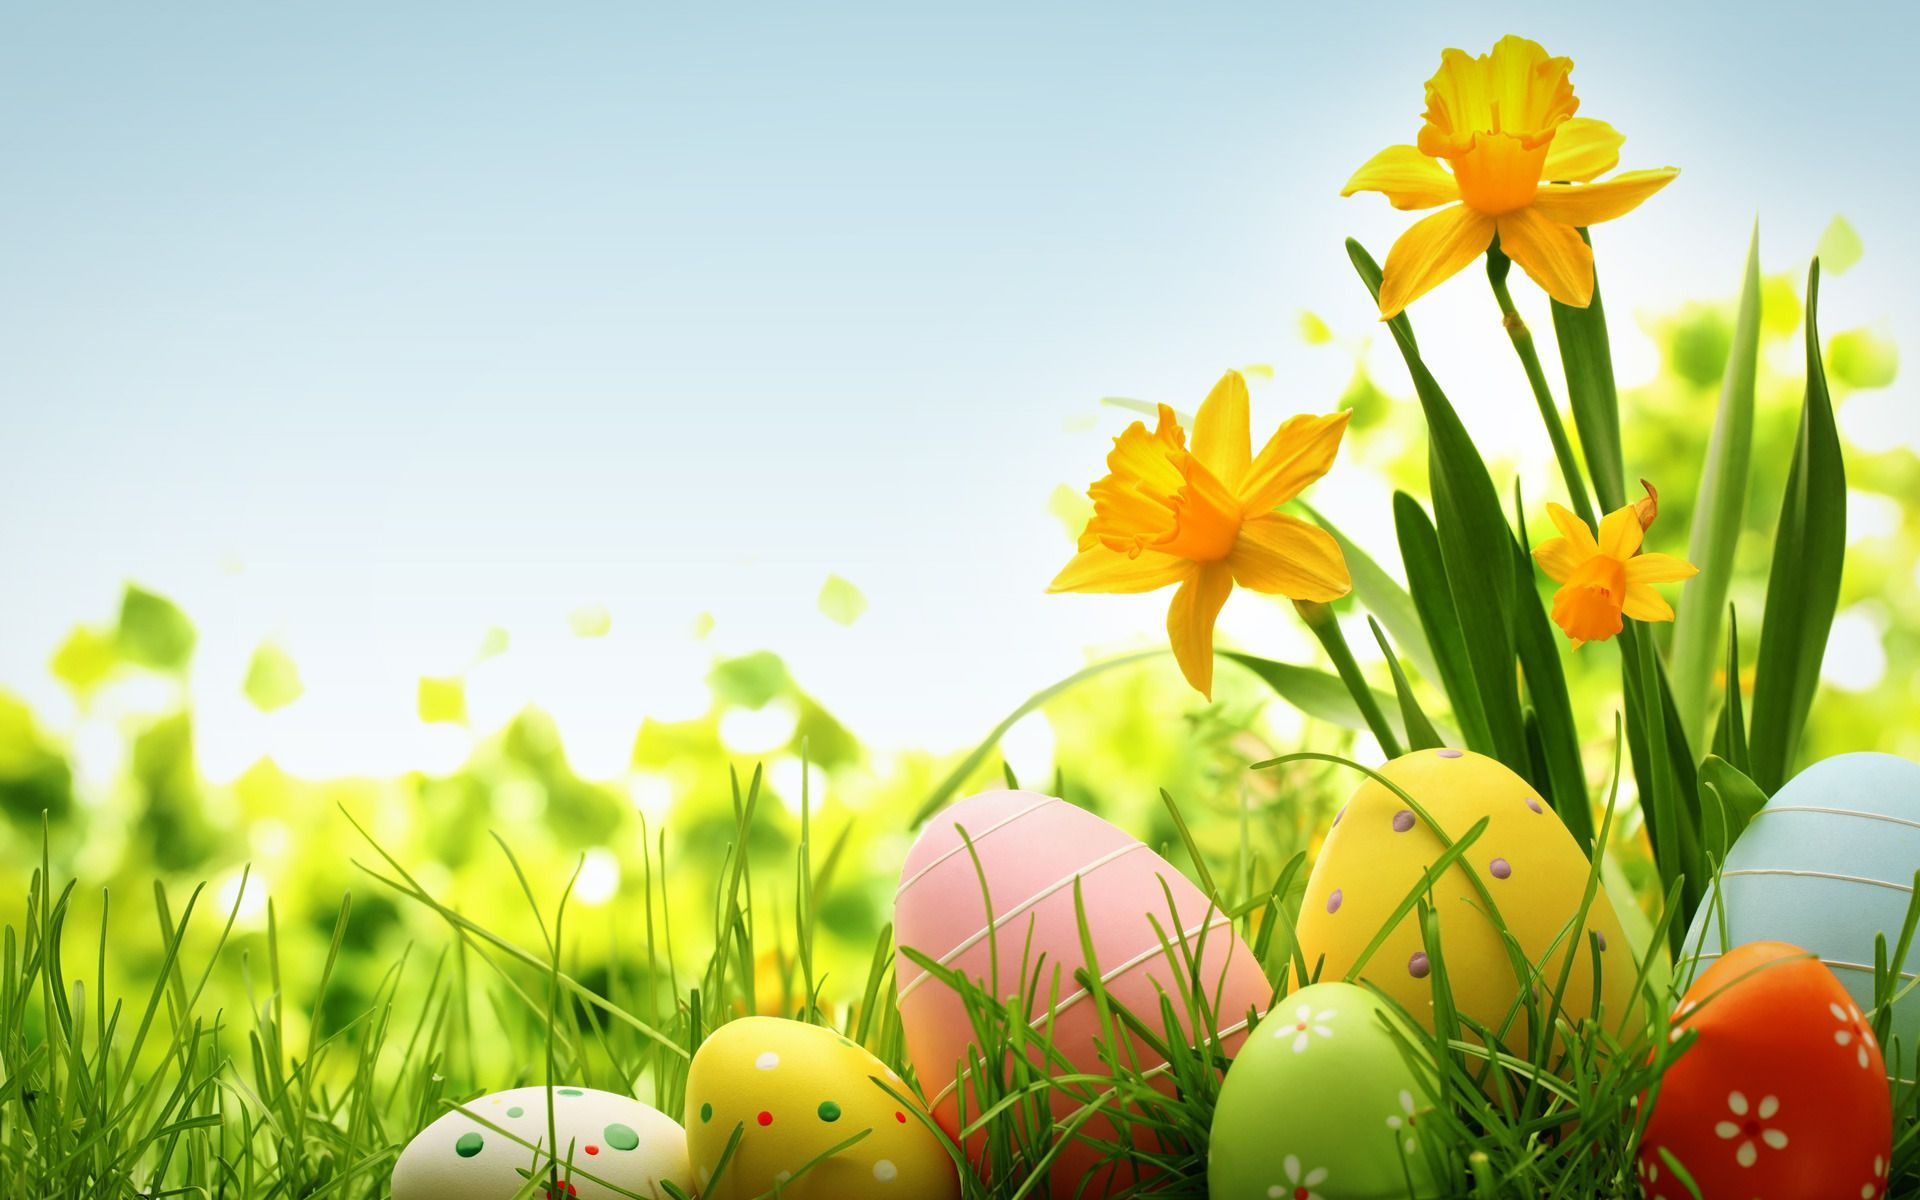 Easter Wallpaper HD download free | Wallpapers, Backgrounds ...